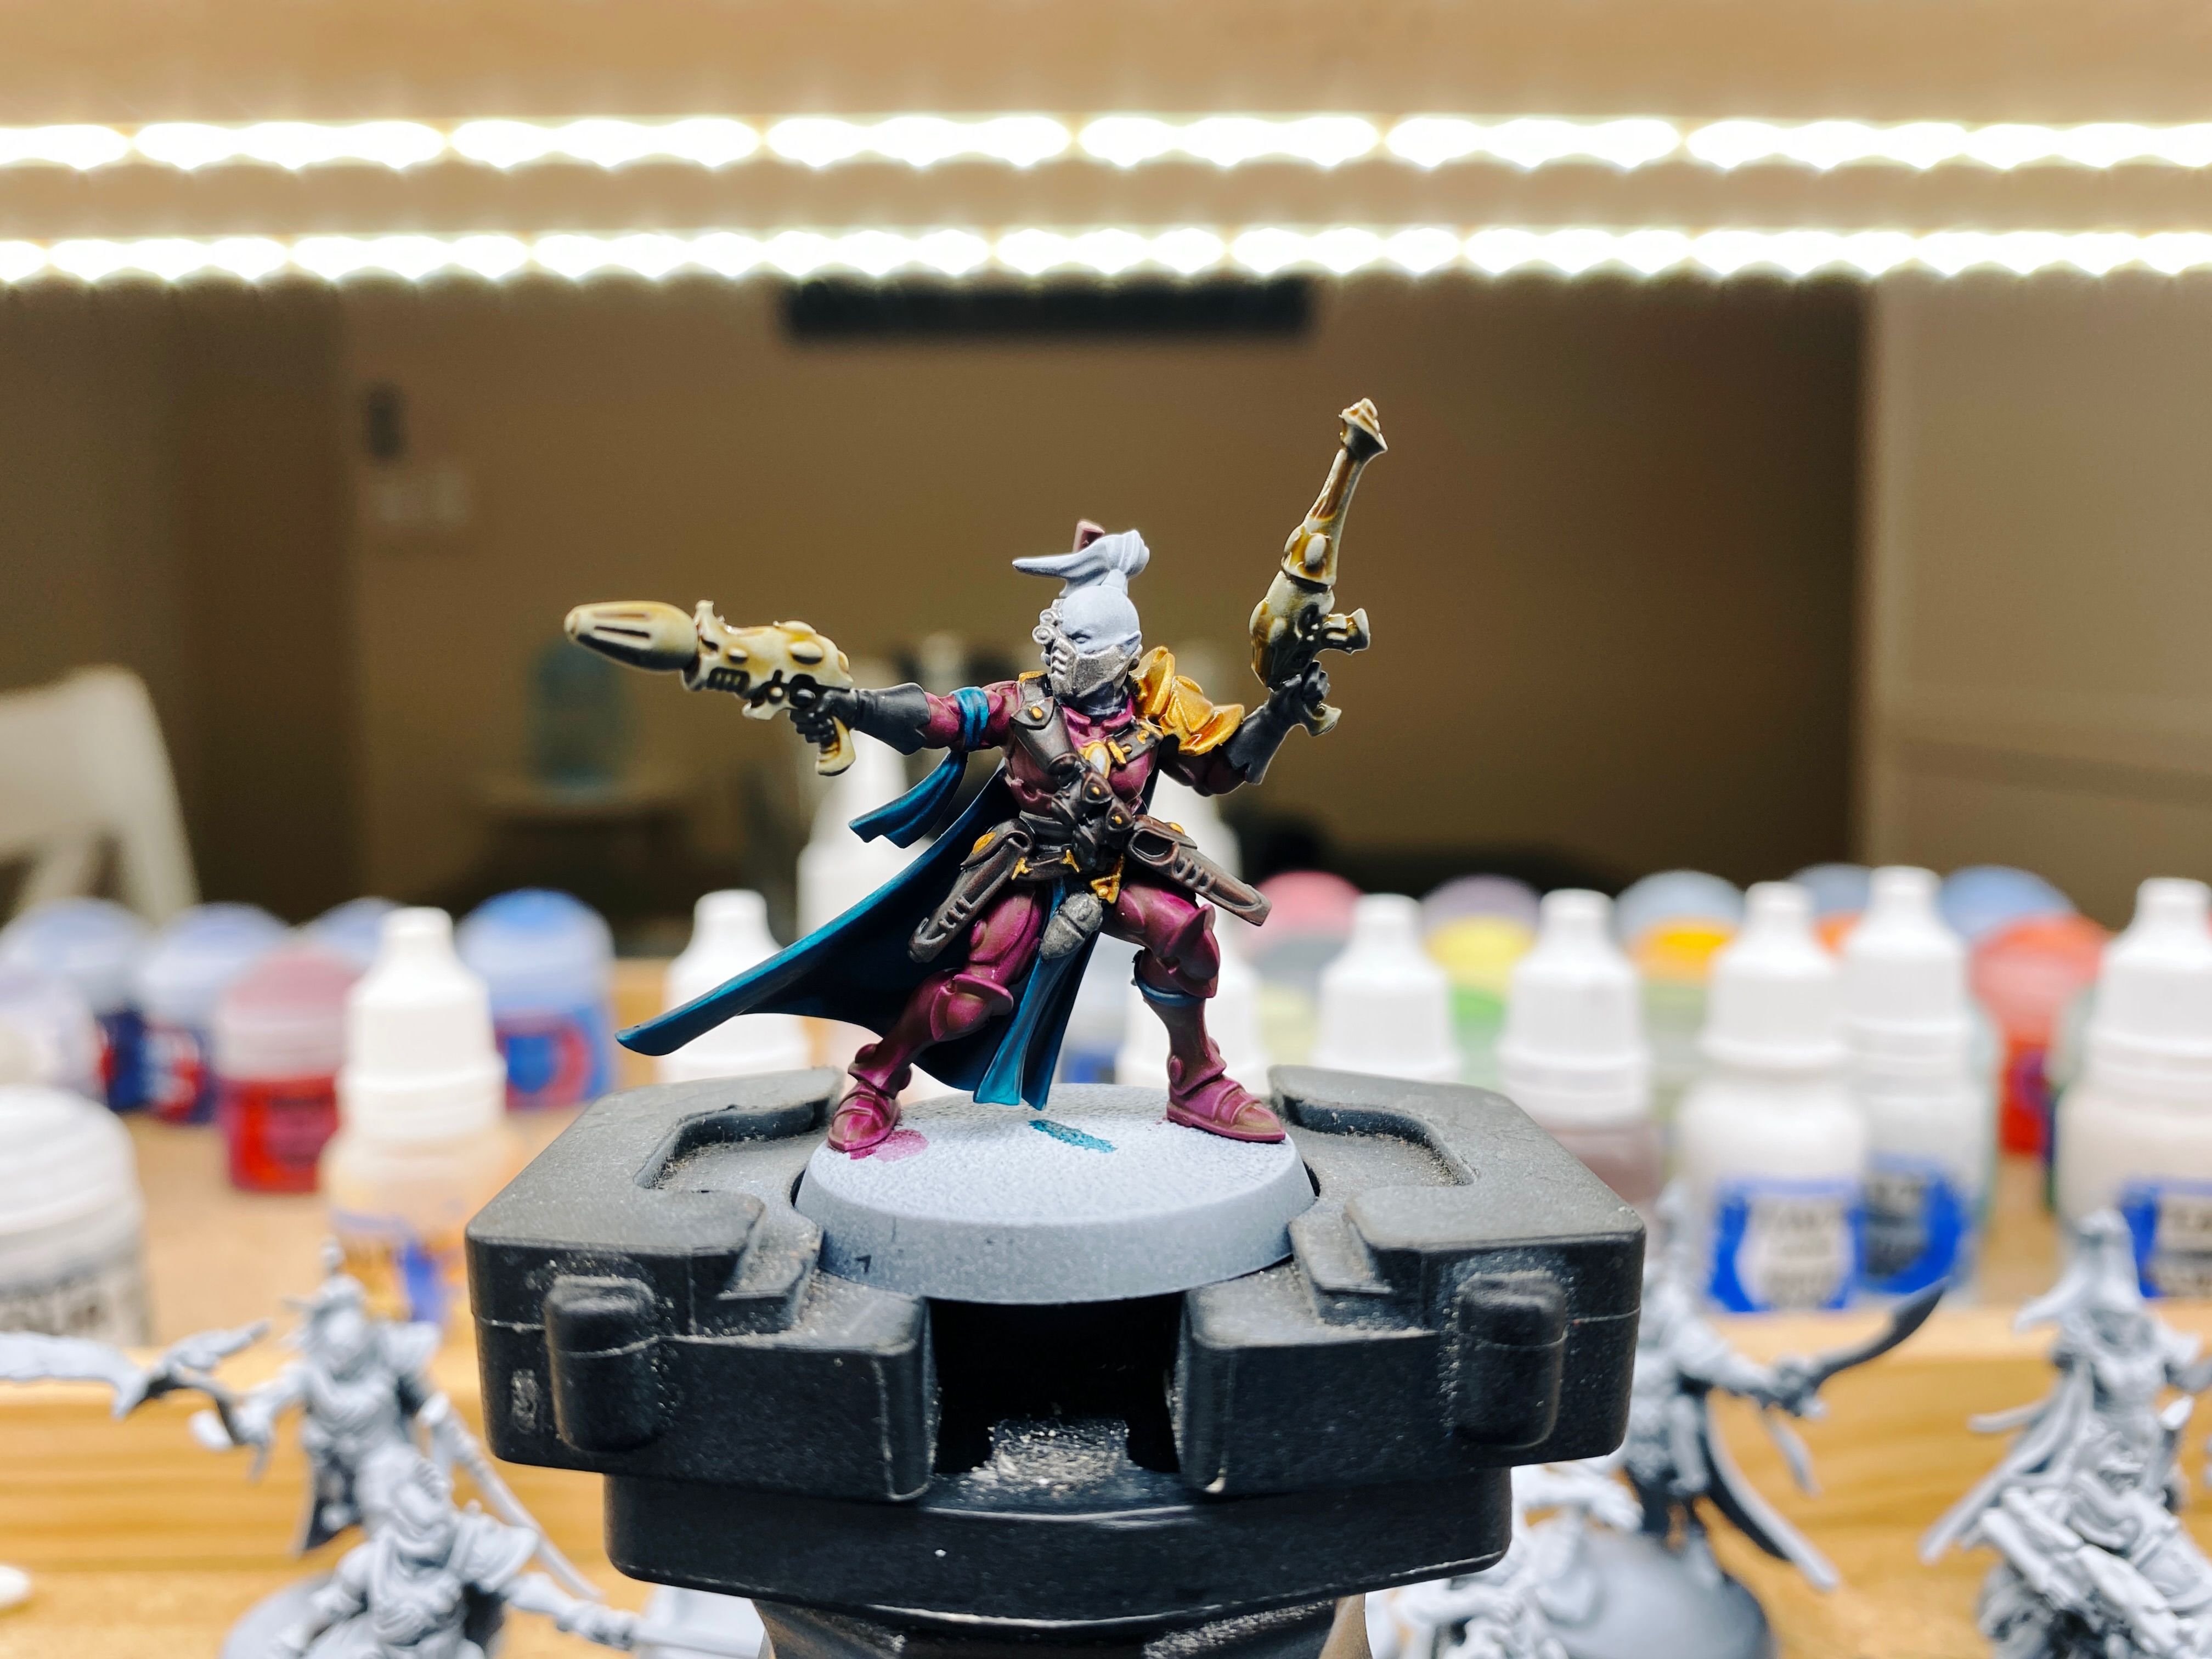 A photo of a partially painted Aeldari miniature (think "space elf"). She's wearing elegant fuchsia-coloured armour with a dark turquoise cape flowing behind her and a bunch of dark leather pouches across her chest, and is holding two bone-coloured alien-looking pistols, one pointing like she's about to shoot and the other one behind her pointing upwards. She's got a cool-looking rebreather on that has an integrated targeting set up over one eye, and she's got a bald head except for a big tall top knot.